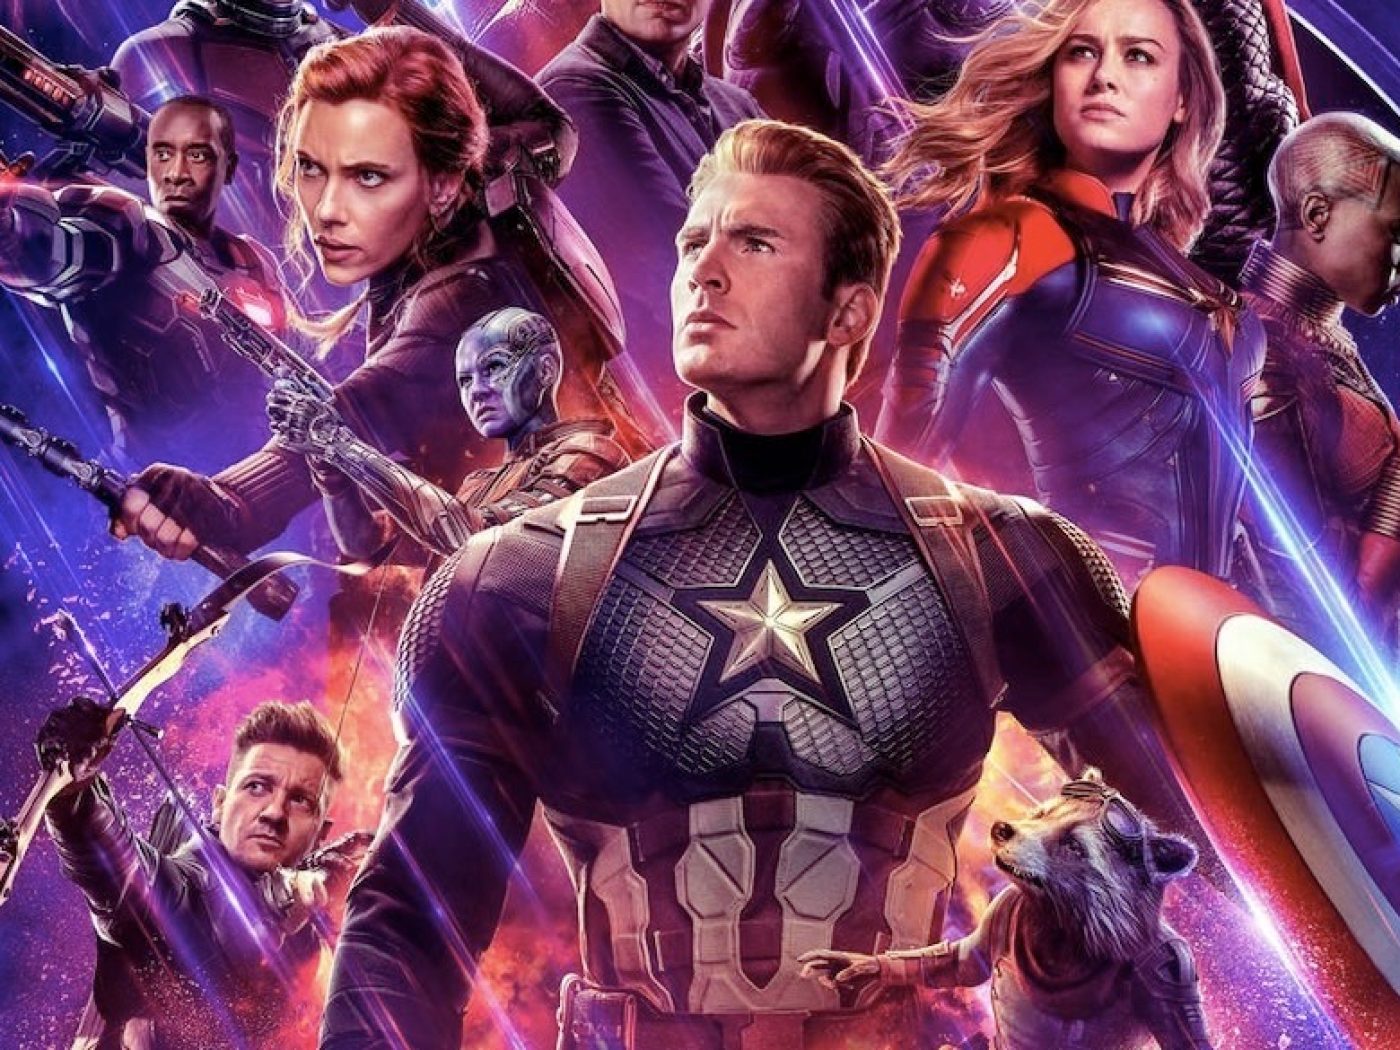 Avengers: Endgame Review - Epic And Absolutely Awesome!